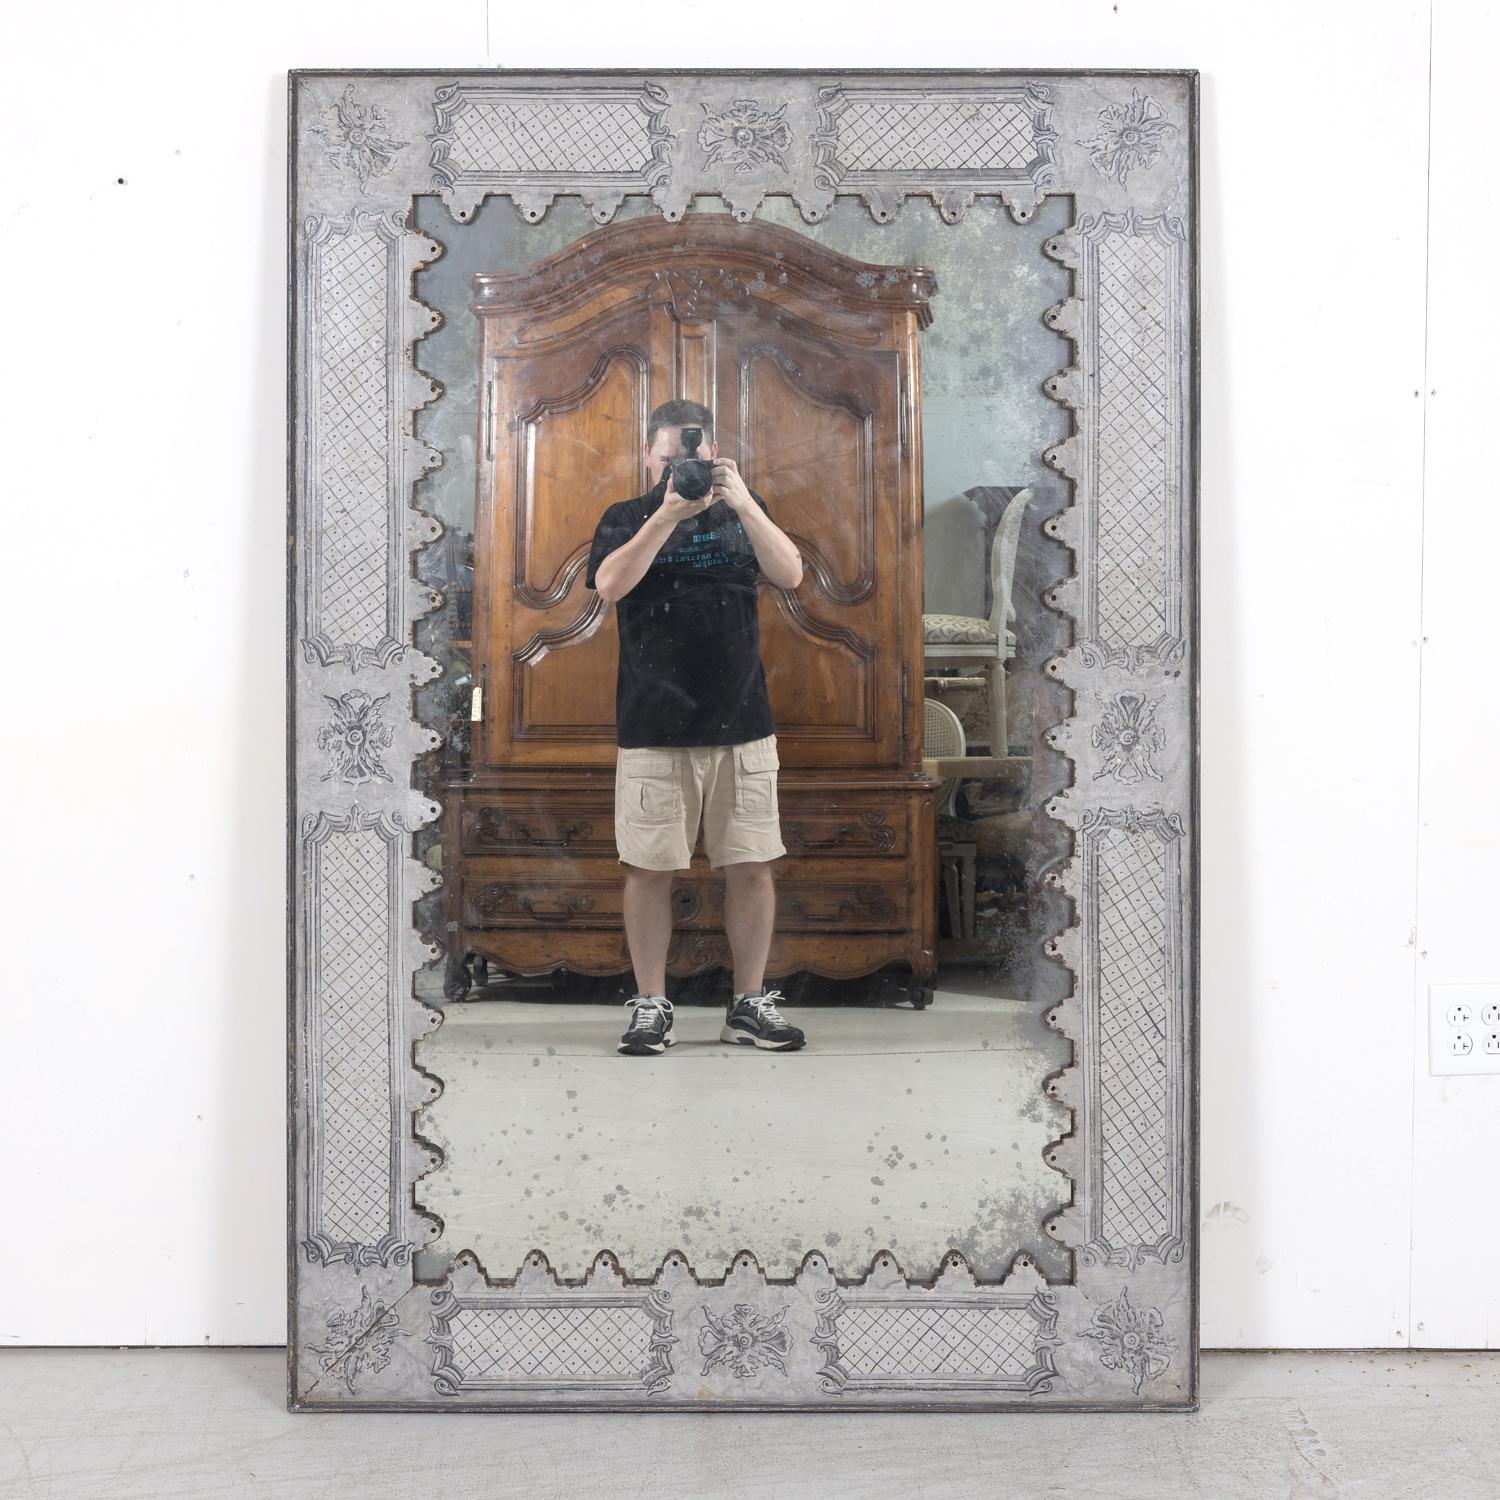 An impressive Spanish mirror having a hand-painted lattice and stylized florets design handcrafted of reclaimed metal and wood with light crazing to the mirror glass. This large mirror features a scalloped interior edge and has a beautiful patina.